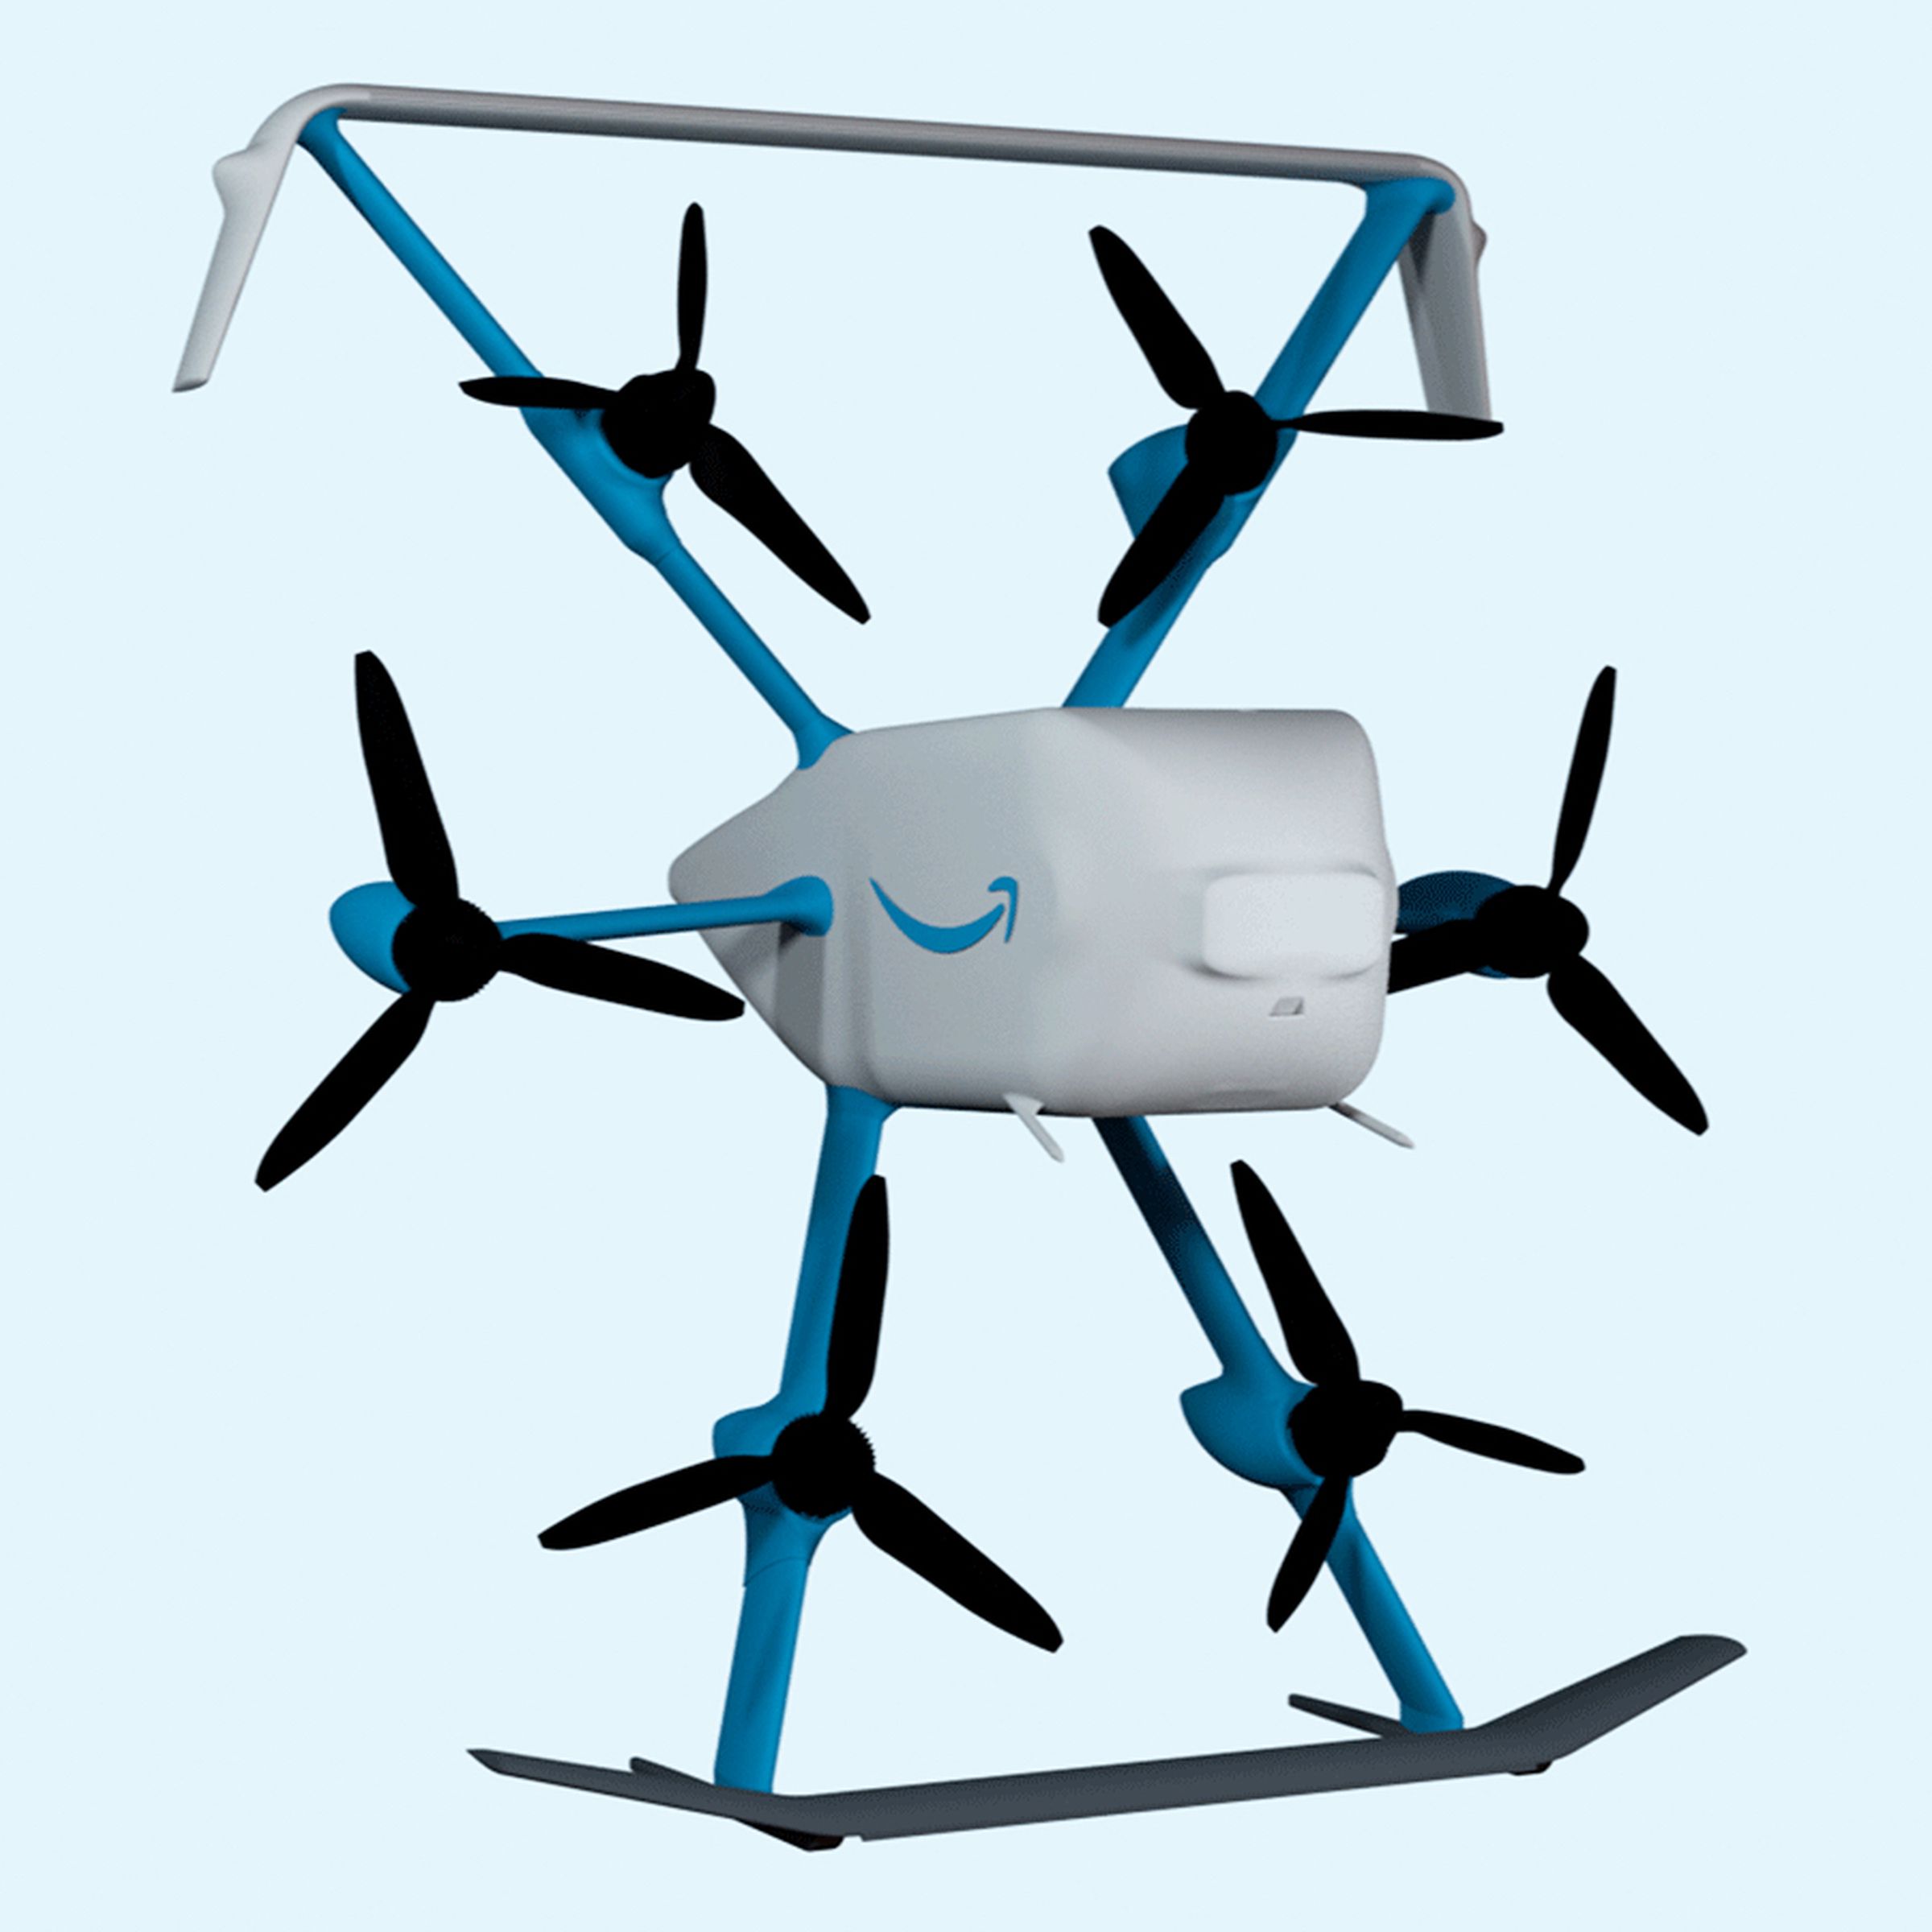 Amazon’s MK30 drone has six propellers in a hexagonal arrangement, with wings attached to the top and bottom arm pairs, and is colored blue and white. The middle is bulbous and teardrop shaped and has the amazon smile logo on it.